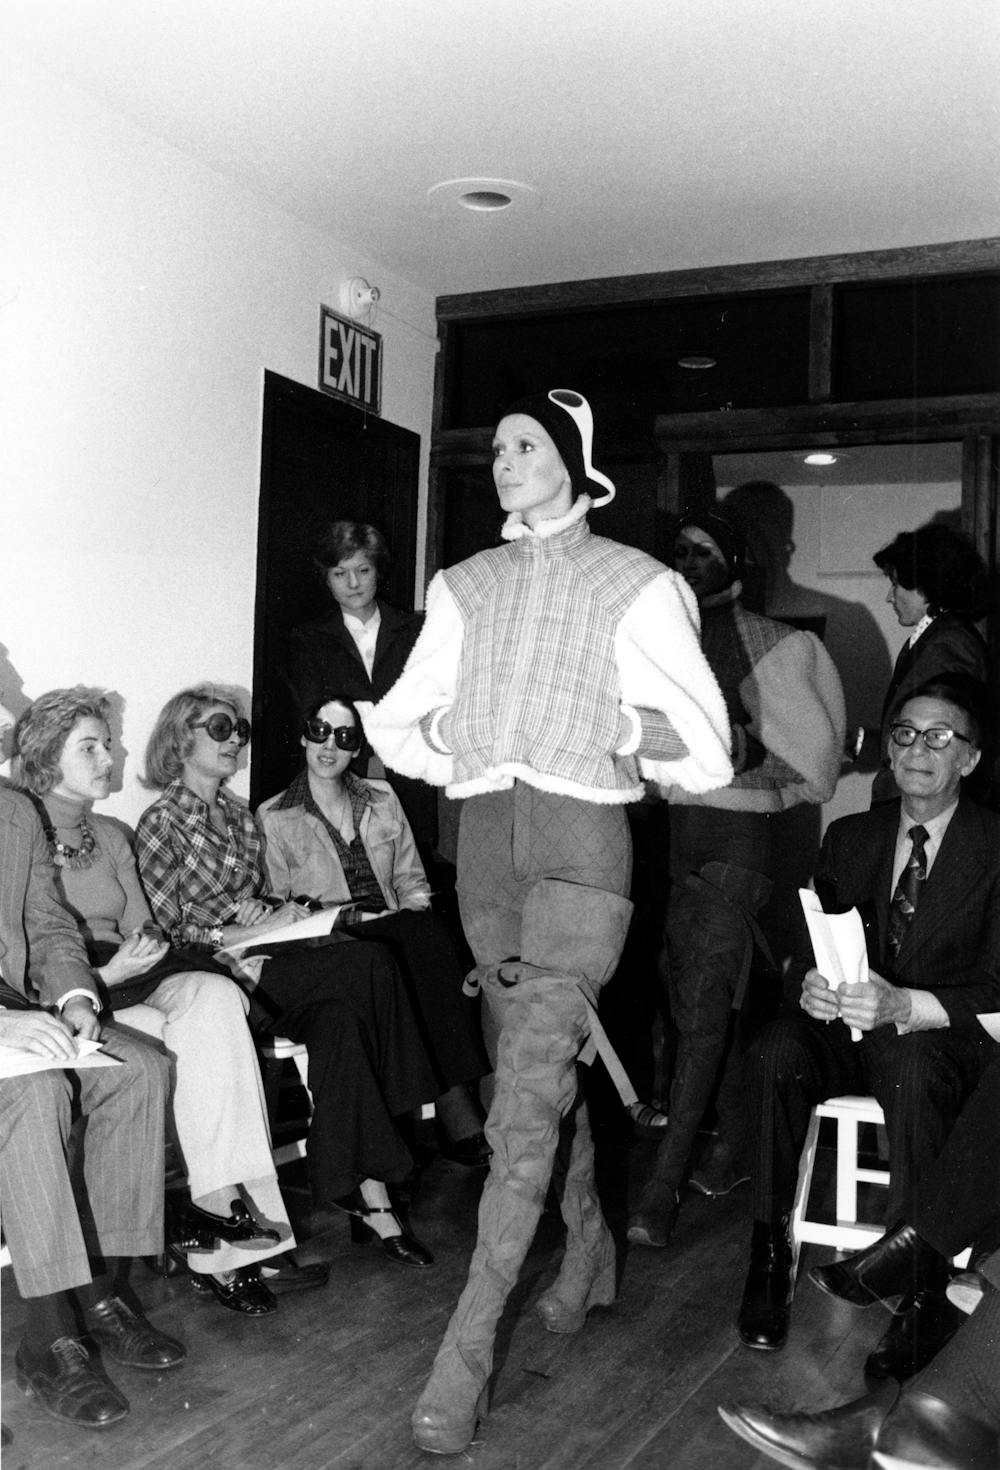 It became a mainstay': How Issey Miyake helped define Melbourne style, Australian fashion